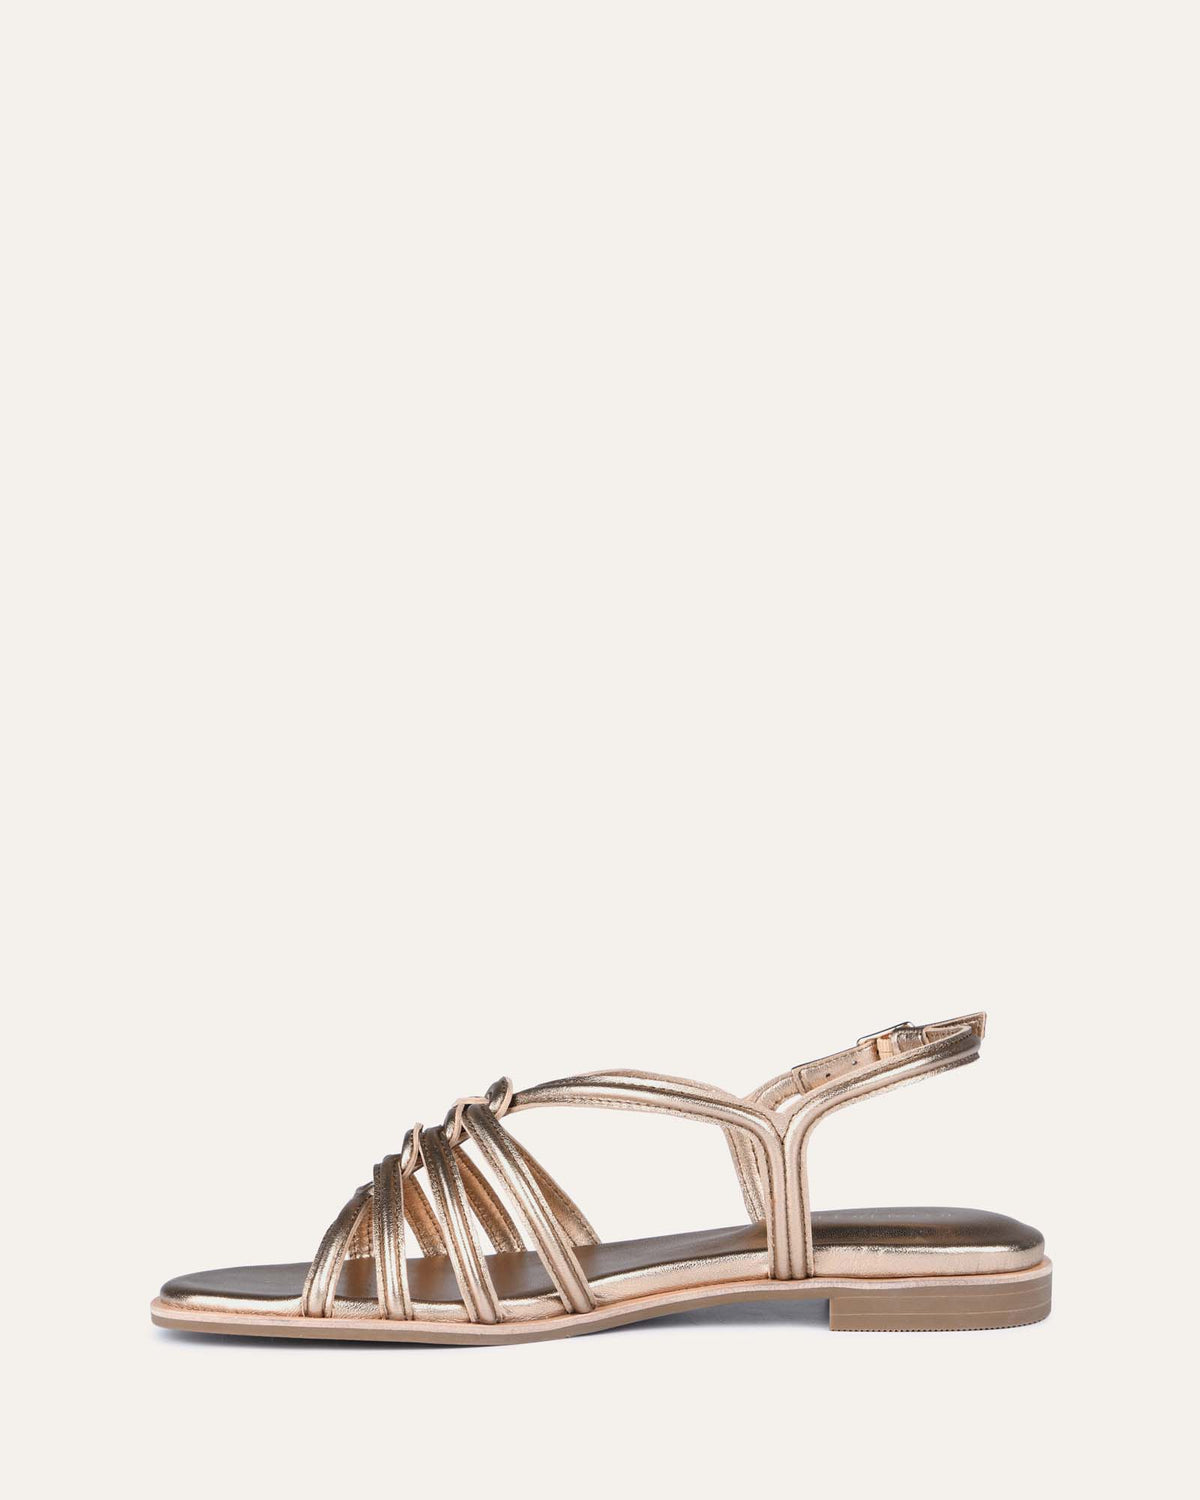 QUEEN FLAT SANDALS GOLD LEATHER